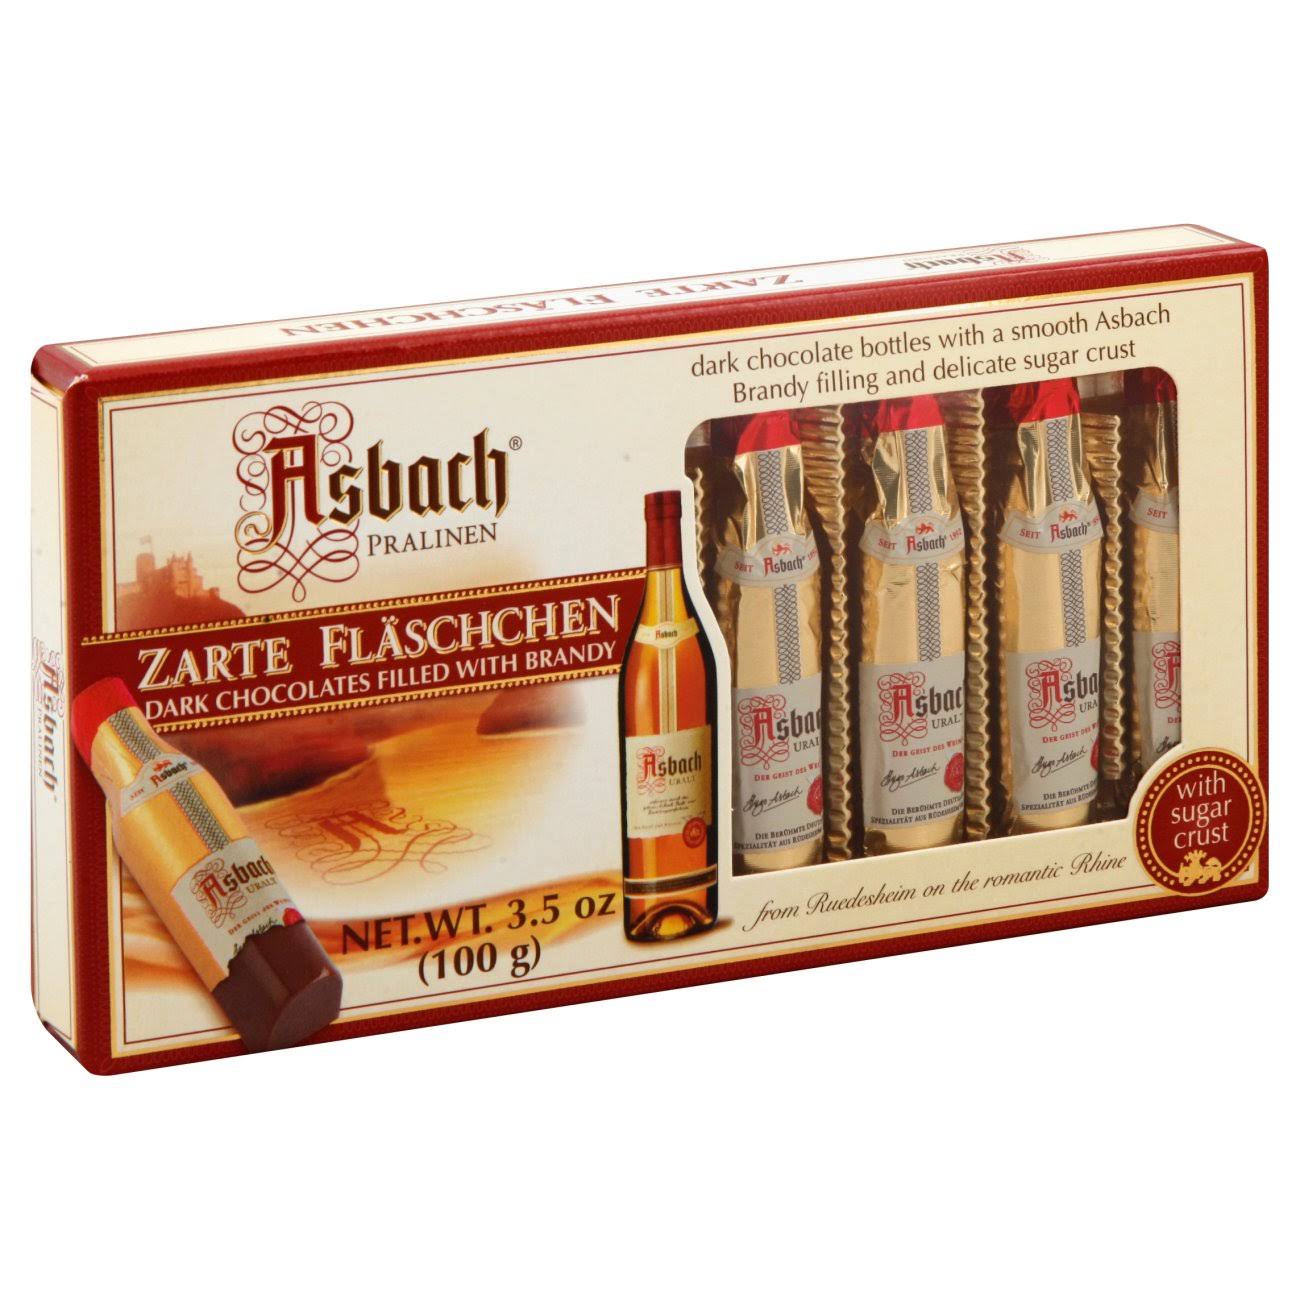 Asbach Uralt Brandy 8 Filled Bottle Shaped Chocolates with Sugar Crust in Window